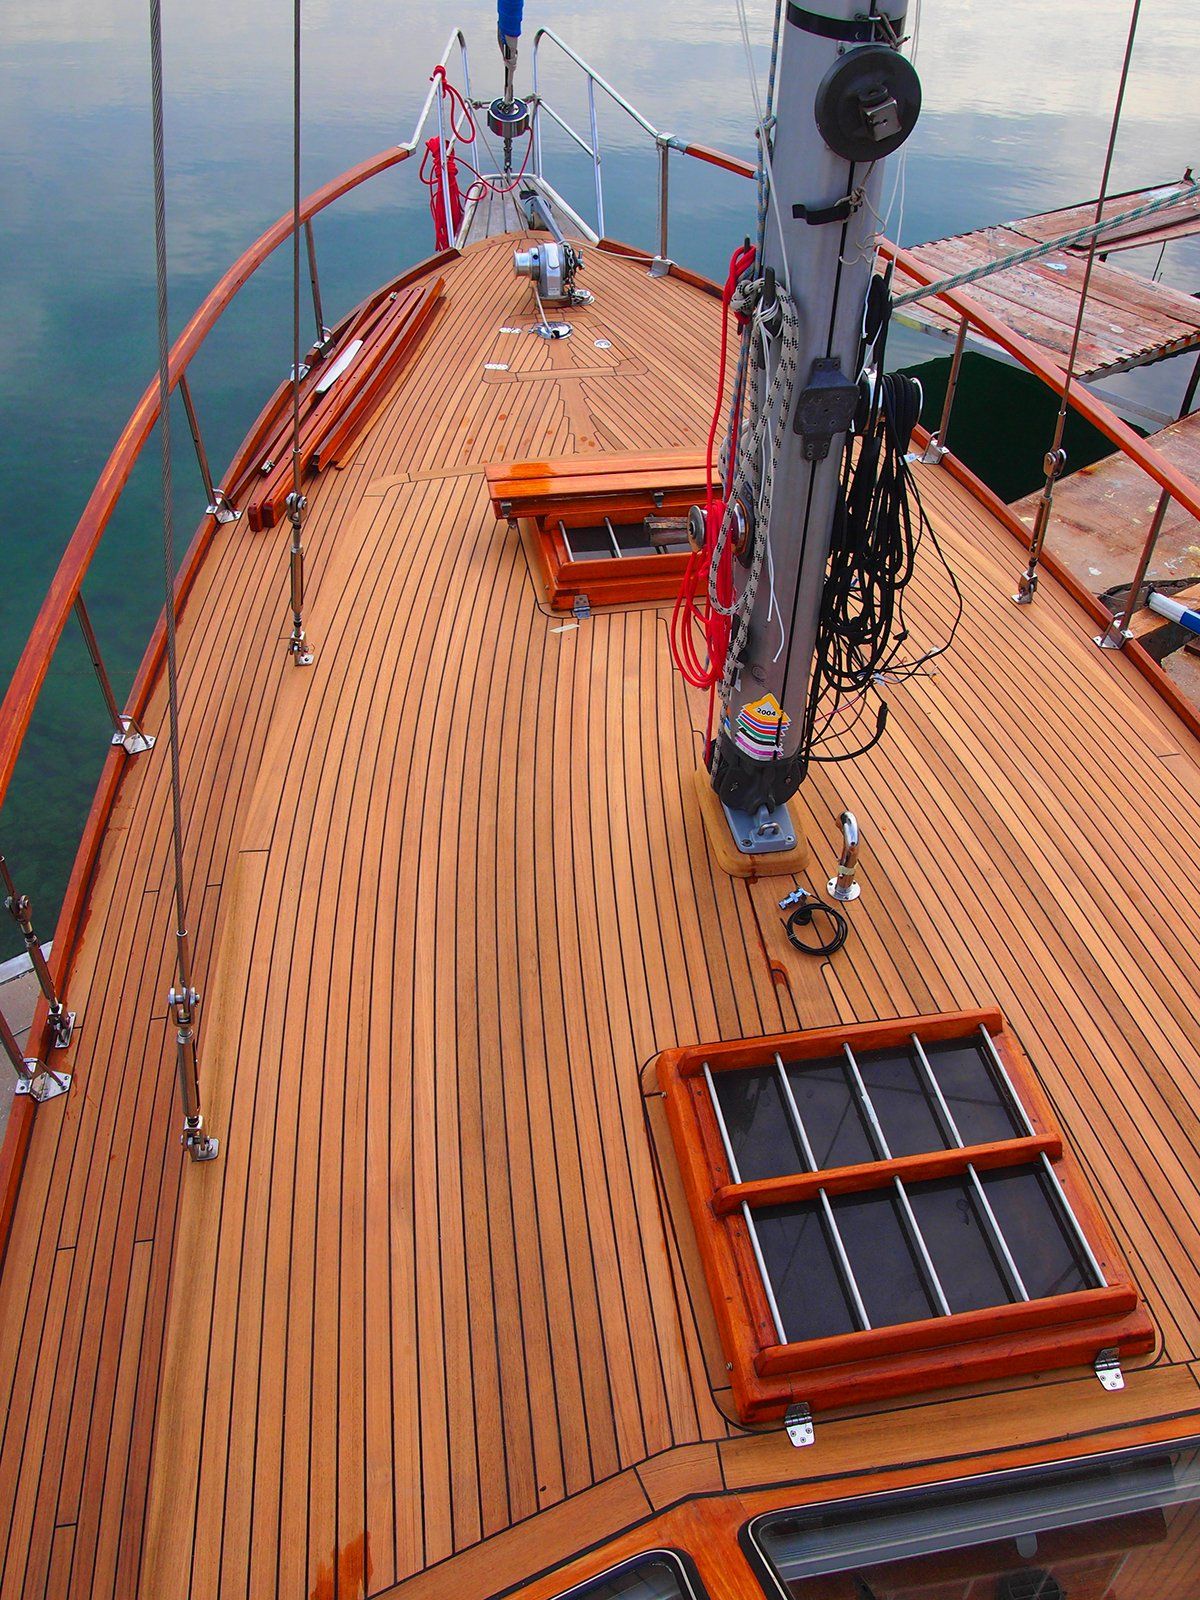 New teakdeck on a Seafin 410 sailing yacht, construction and installation by Mobilerbootsbau boatbuilding and teck decking company from Germany